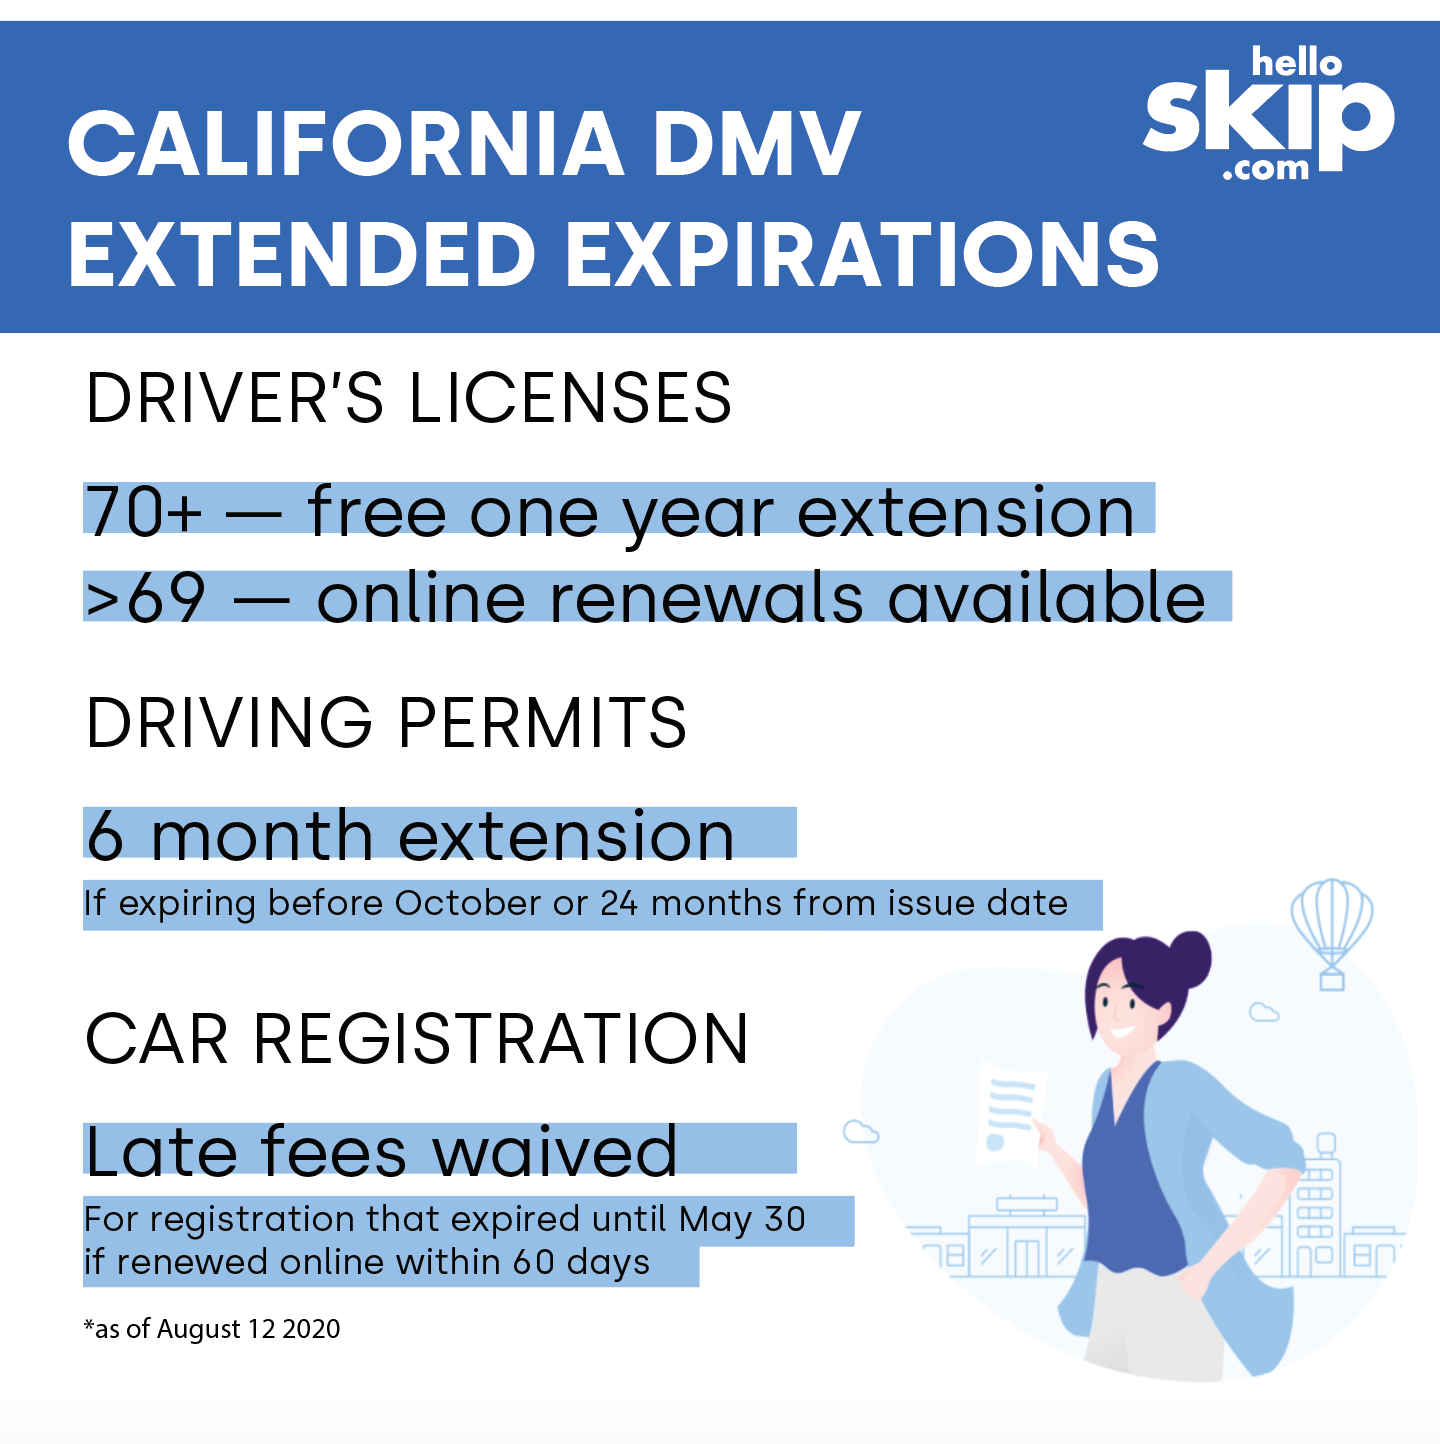 https://ghost.helloskip.com/blog/content/images/2020/08/California-DMV-License-Extensions.png